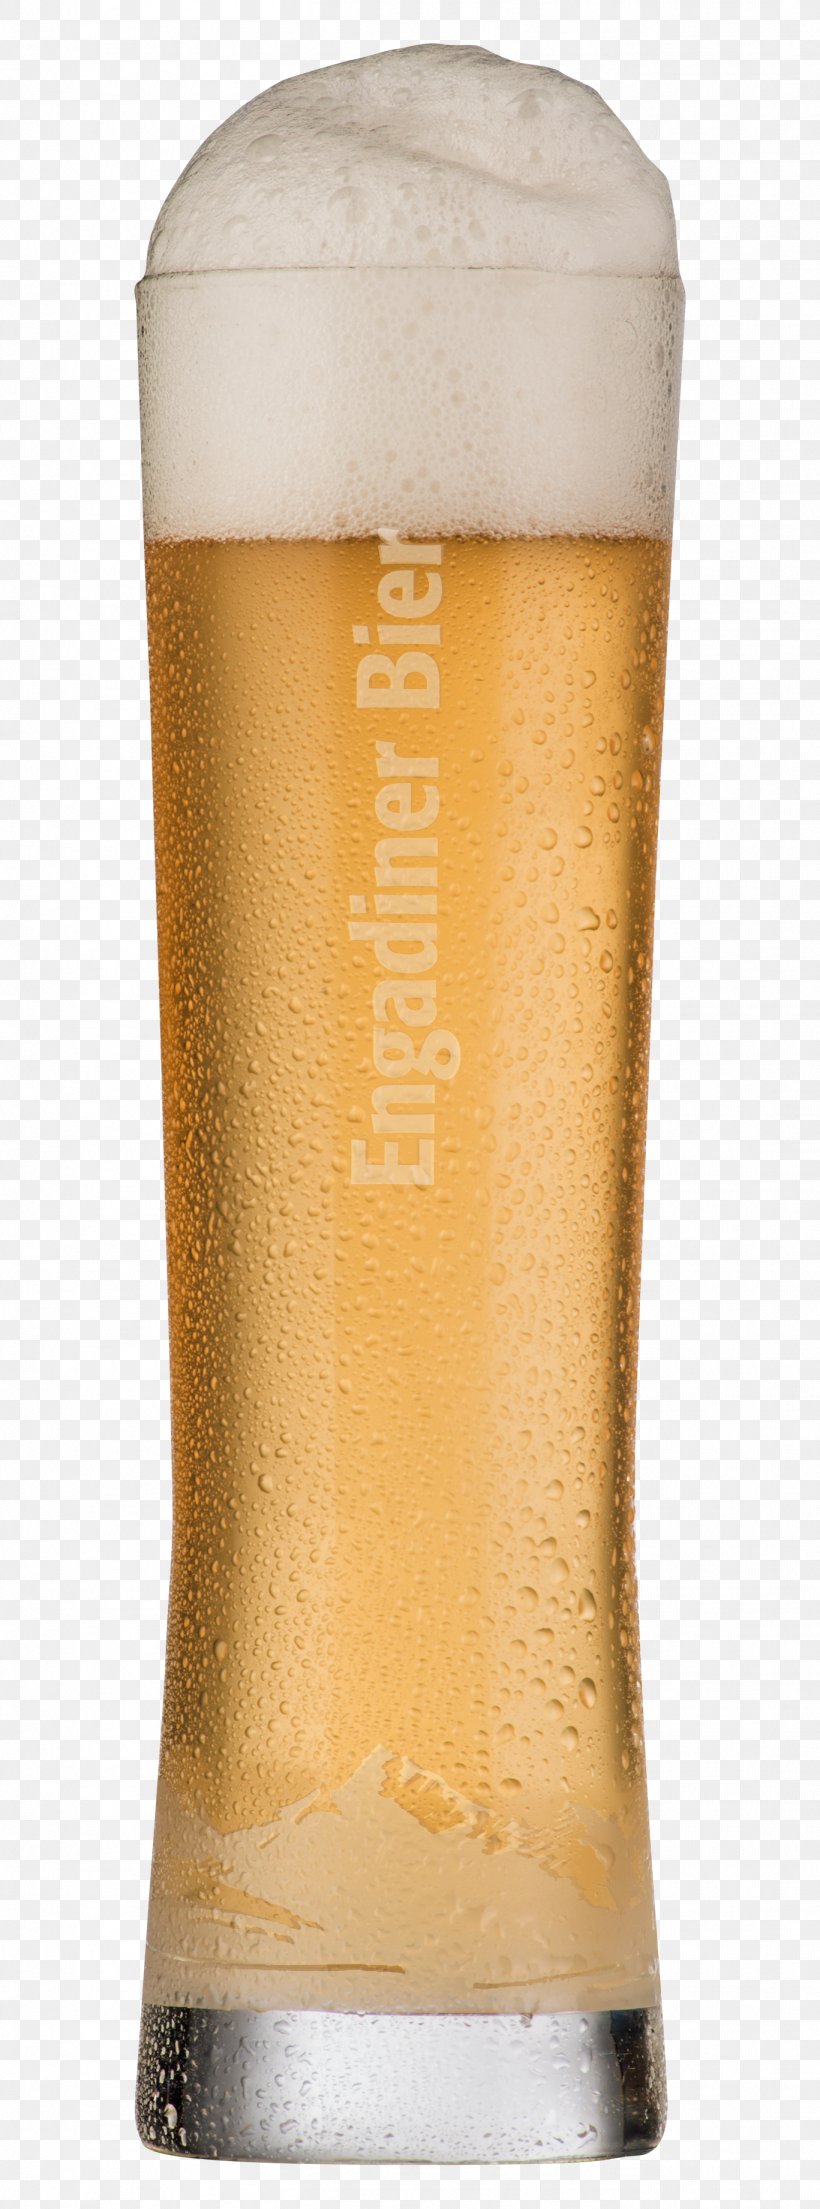 Wheat Beer Portrait Blue Pint Glass Imperial Pint, PNG, 1367x3684px, Wheat Beer, Beer, Beer Glass, Beer Glasses, Blue Download Free